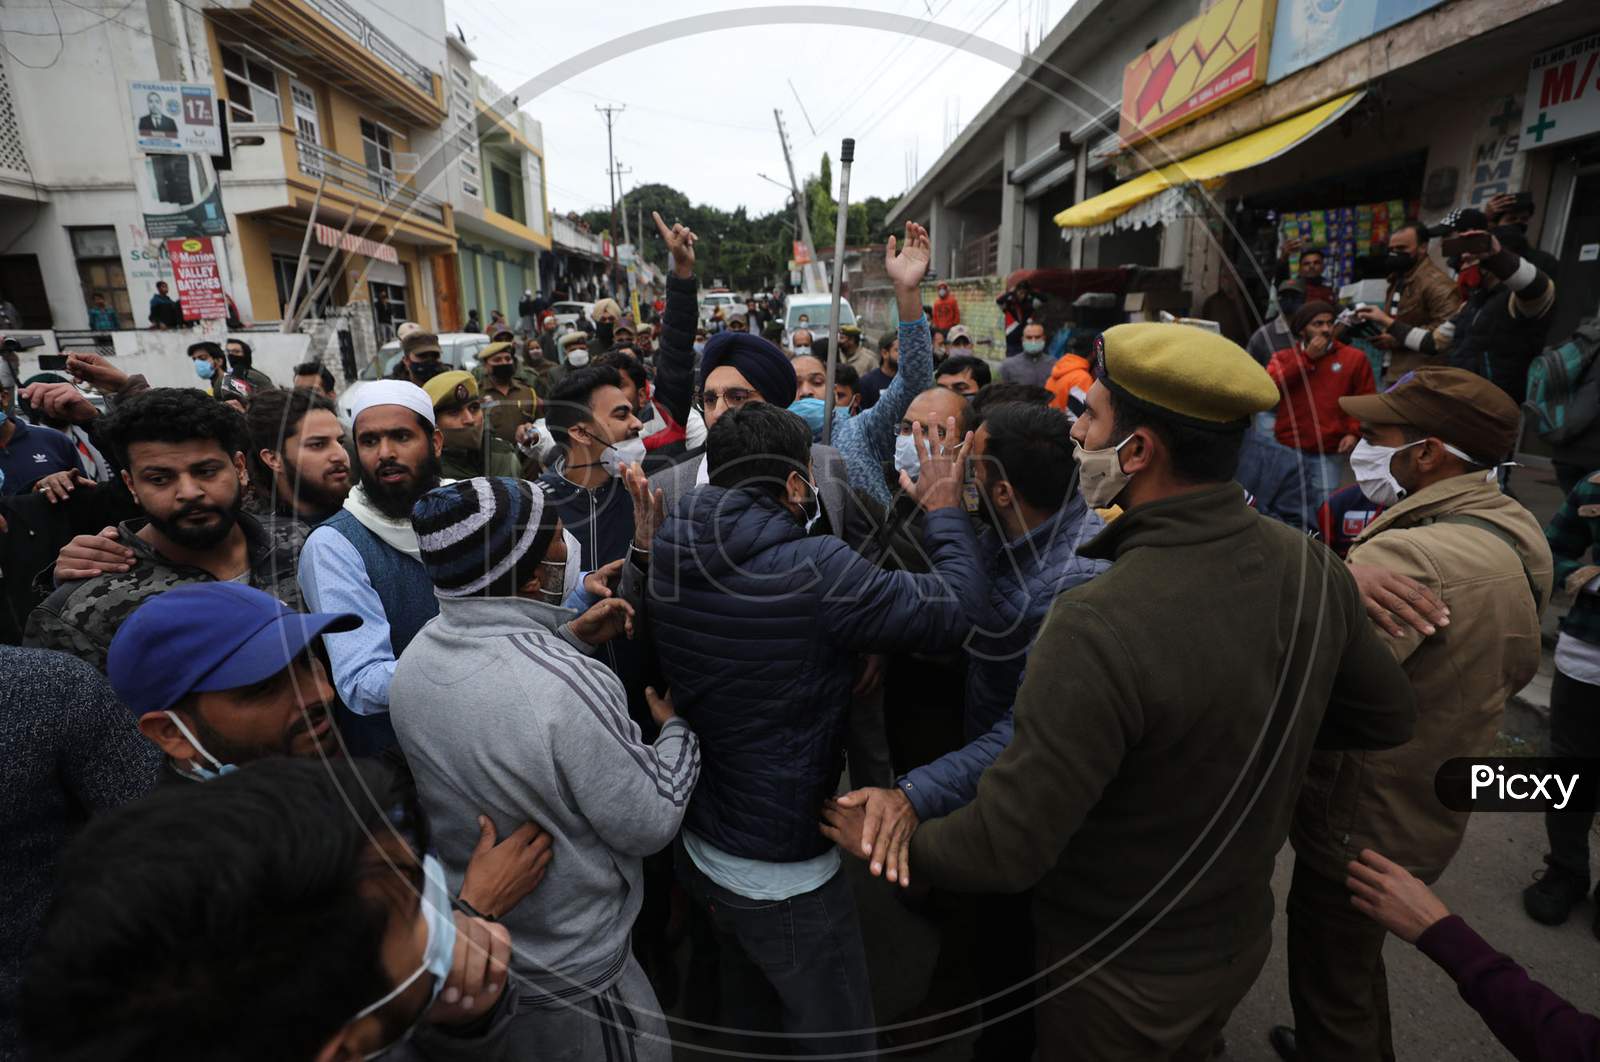 Policemen stops National Conference supporters from marching towards main road after Bjym activists made an unsuccessful attempt to stage a protest outside former chief minister Farooq Abdullah's residence in Jammu on Wednesday. The bjym activists were protesting against alleged encroachment of land